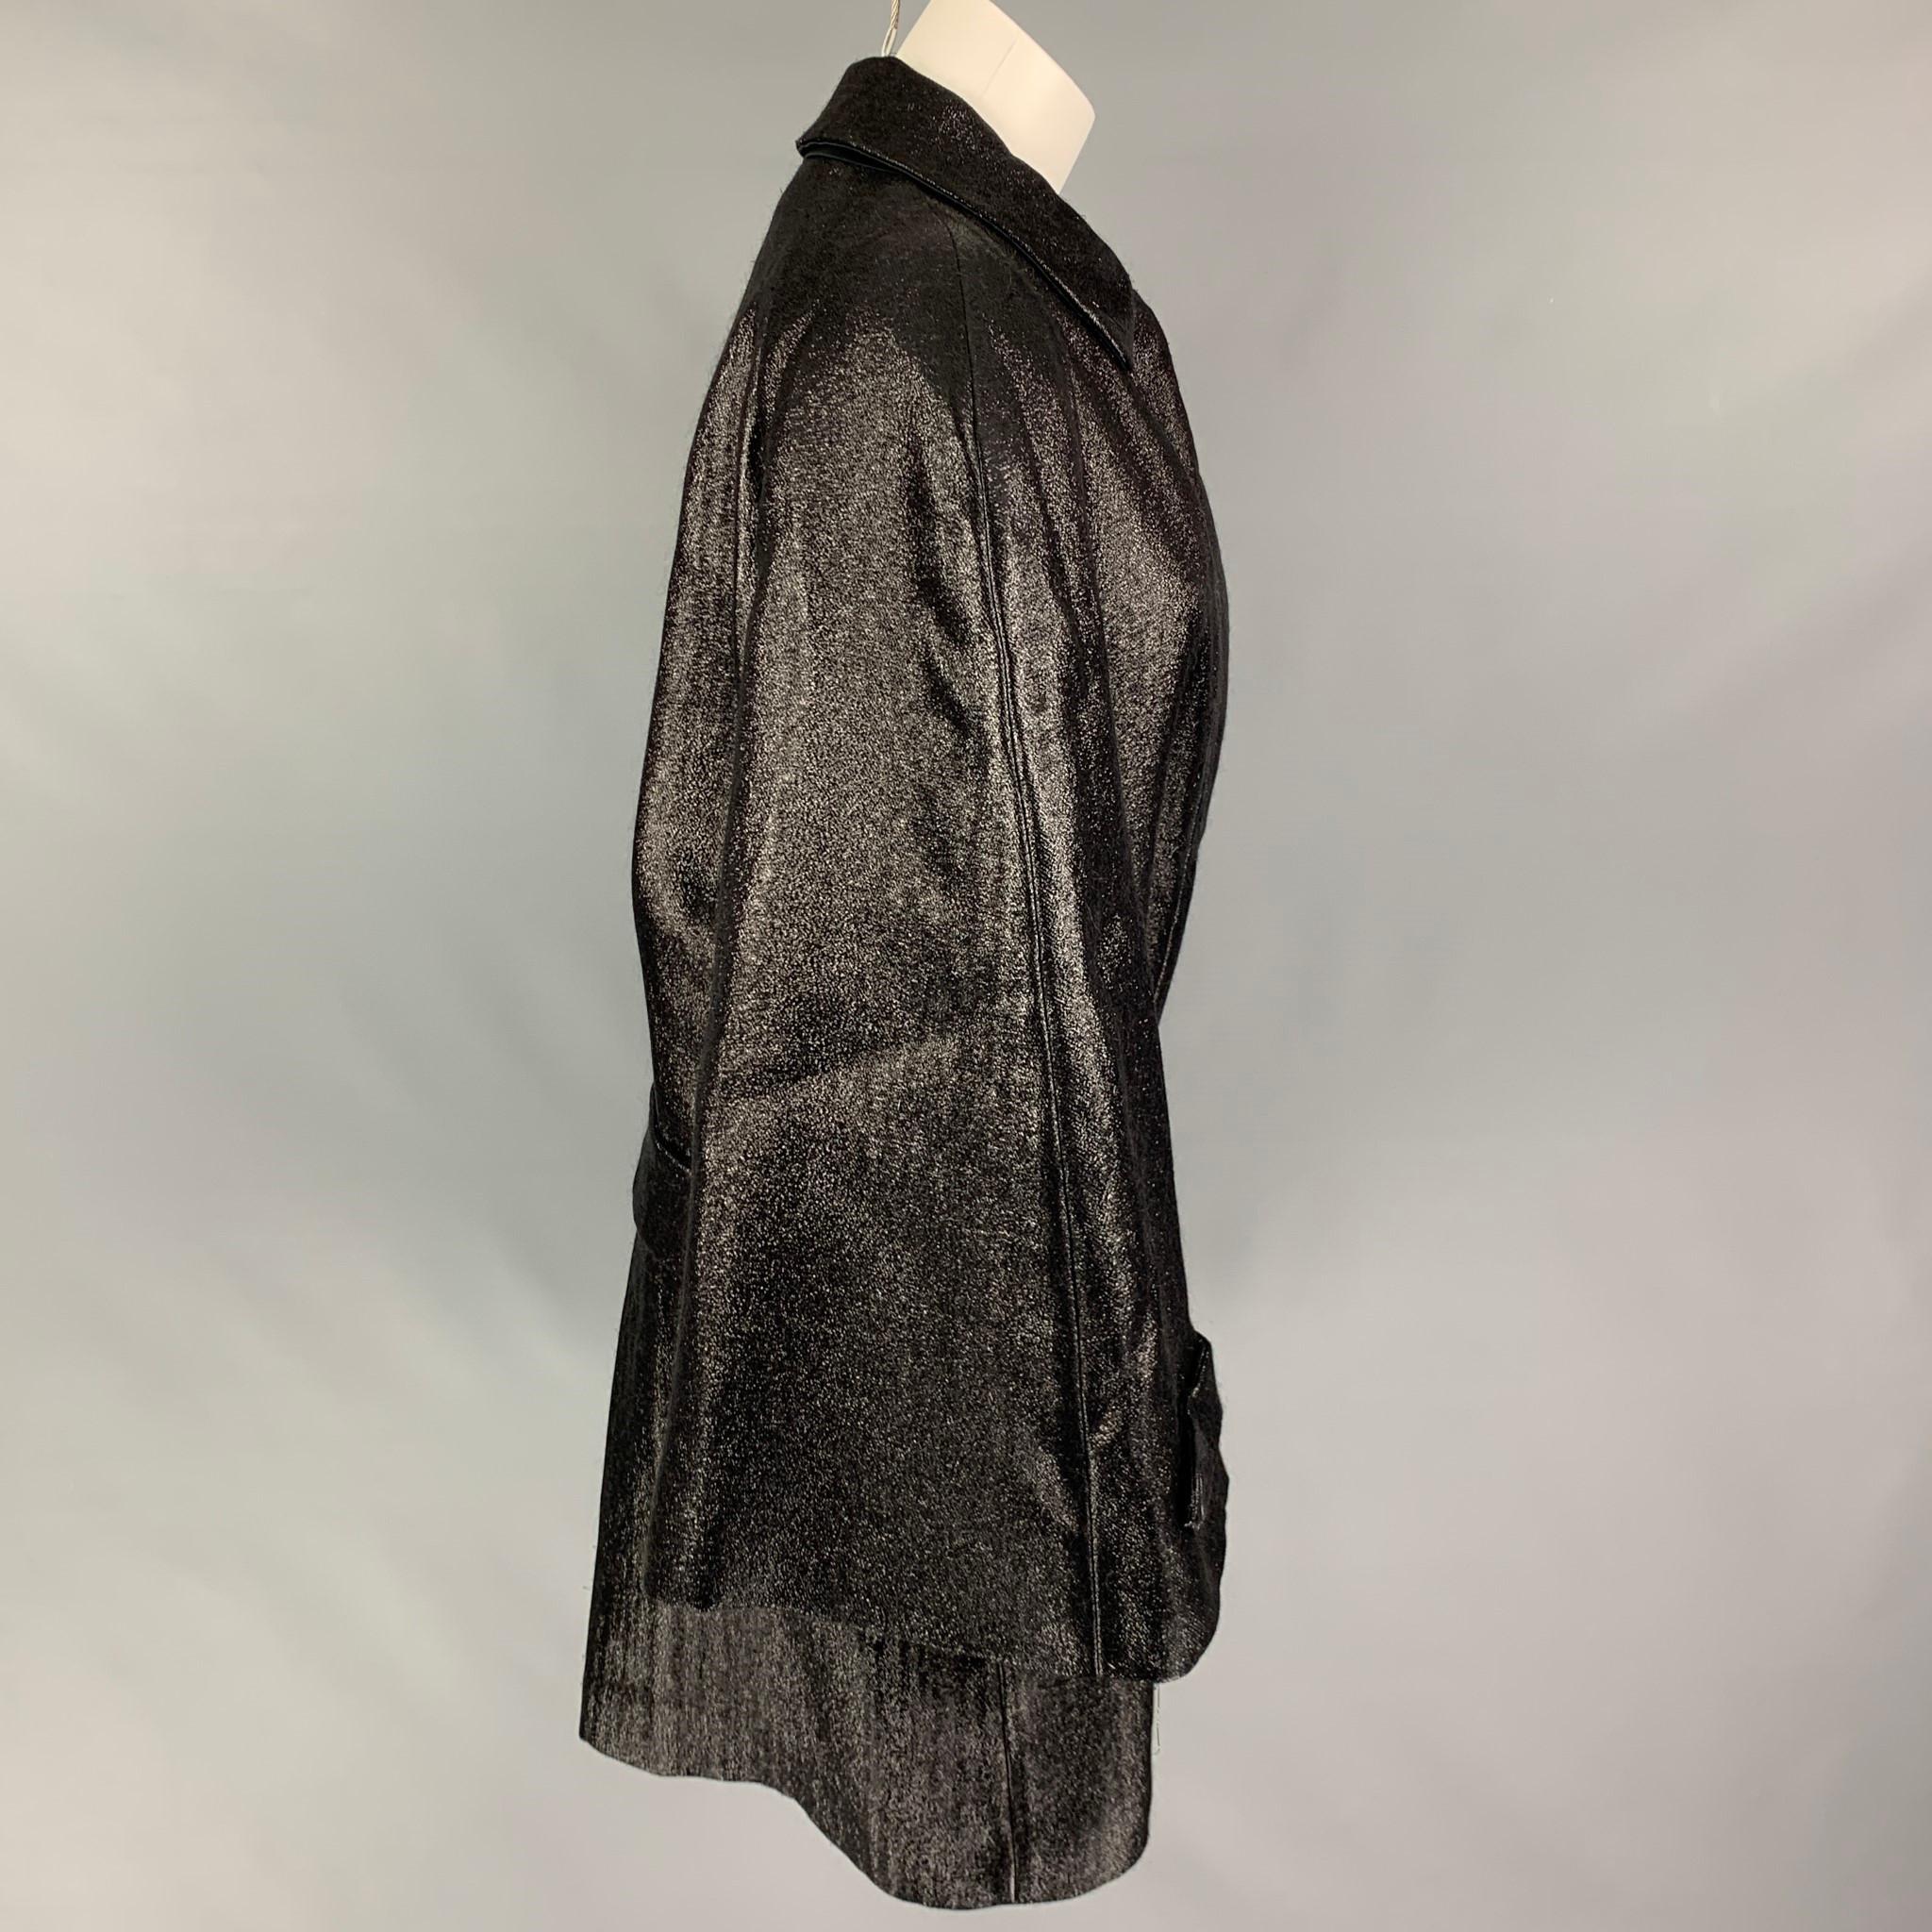 VIKTOR & ROLF coat comes in a black metallic mohair blend featuring a oversized fit, belted, slit pockets, spread collar, wide sleeves, and a hidden placket closure. Made in Italy. 

Very Good Pre-Owned Condition.
Marked: